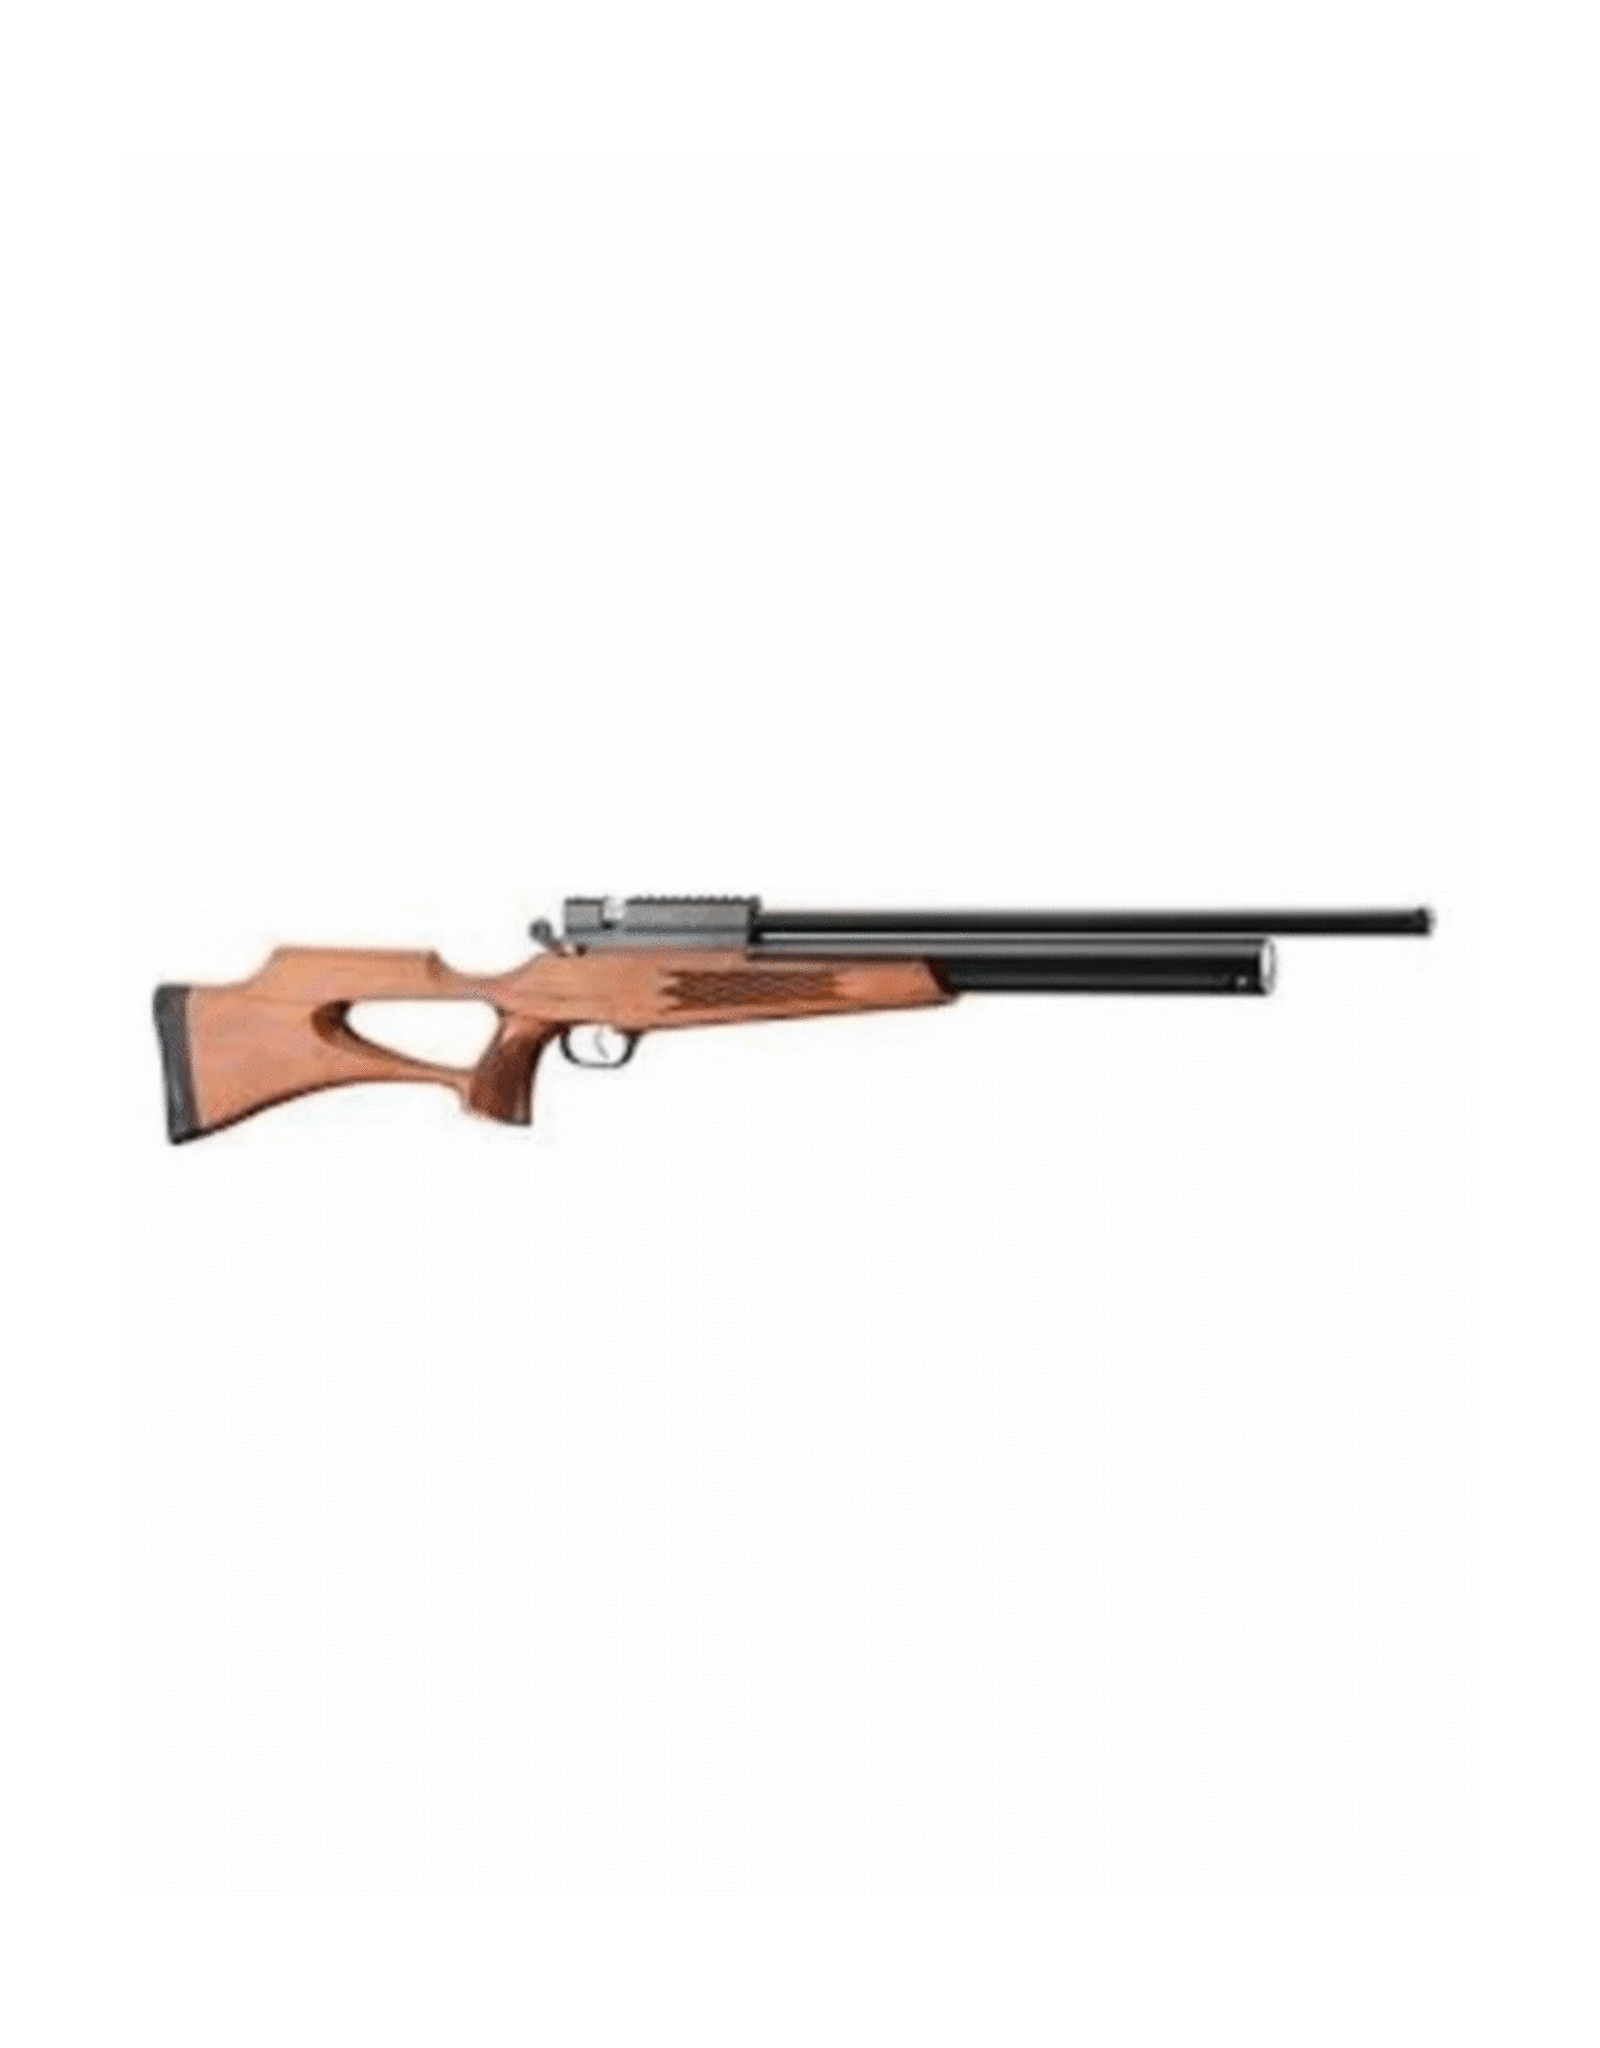 Evanix .22 Cal | 6 Rd | AR22 PCP Rifle with Revolver Hammer Action and Wood Stock by Evanix 26" Barrel